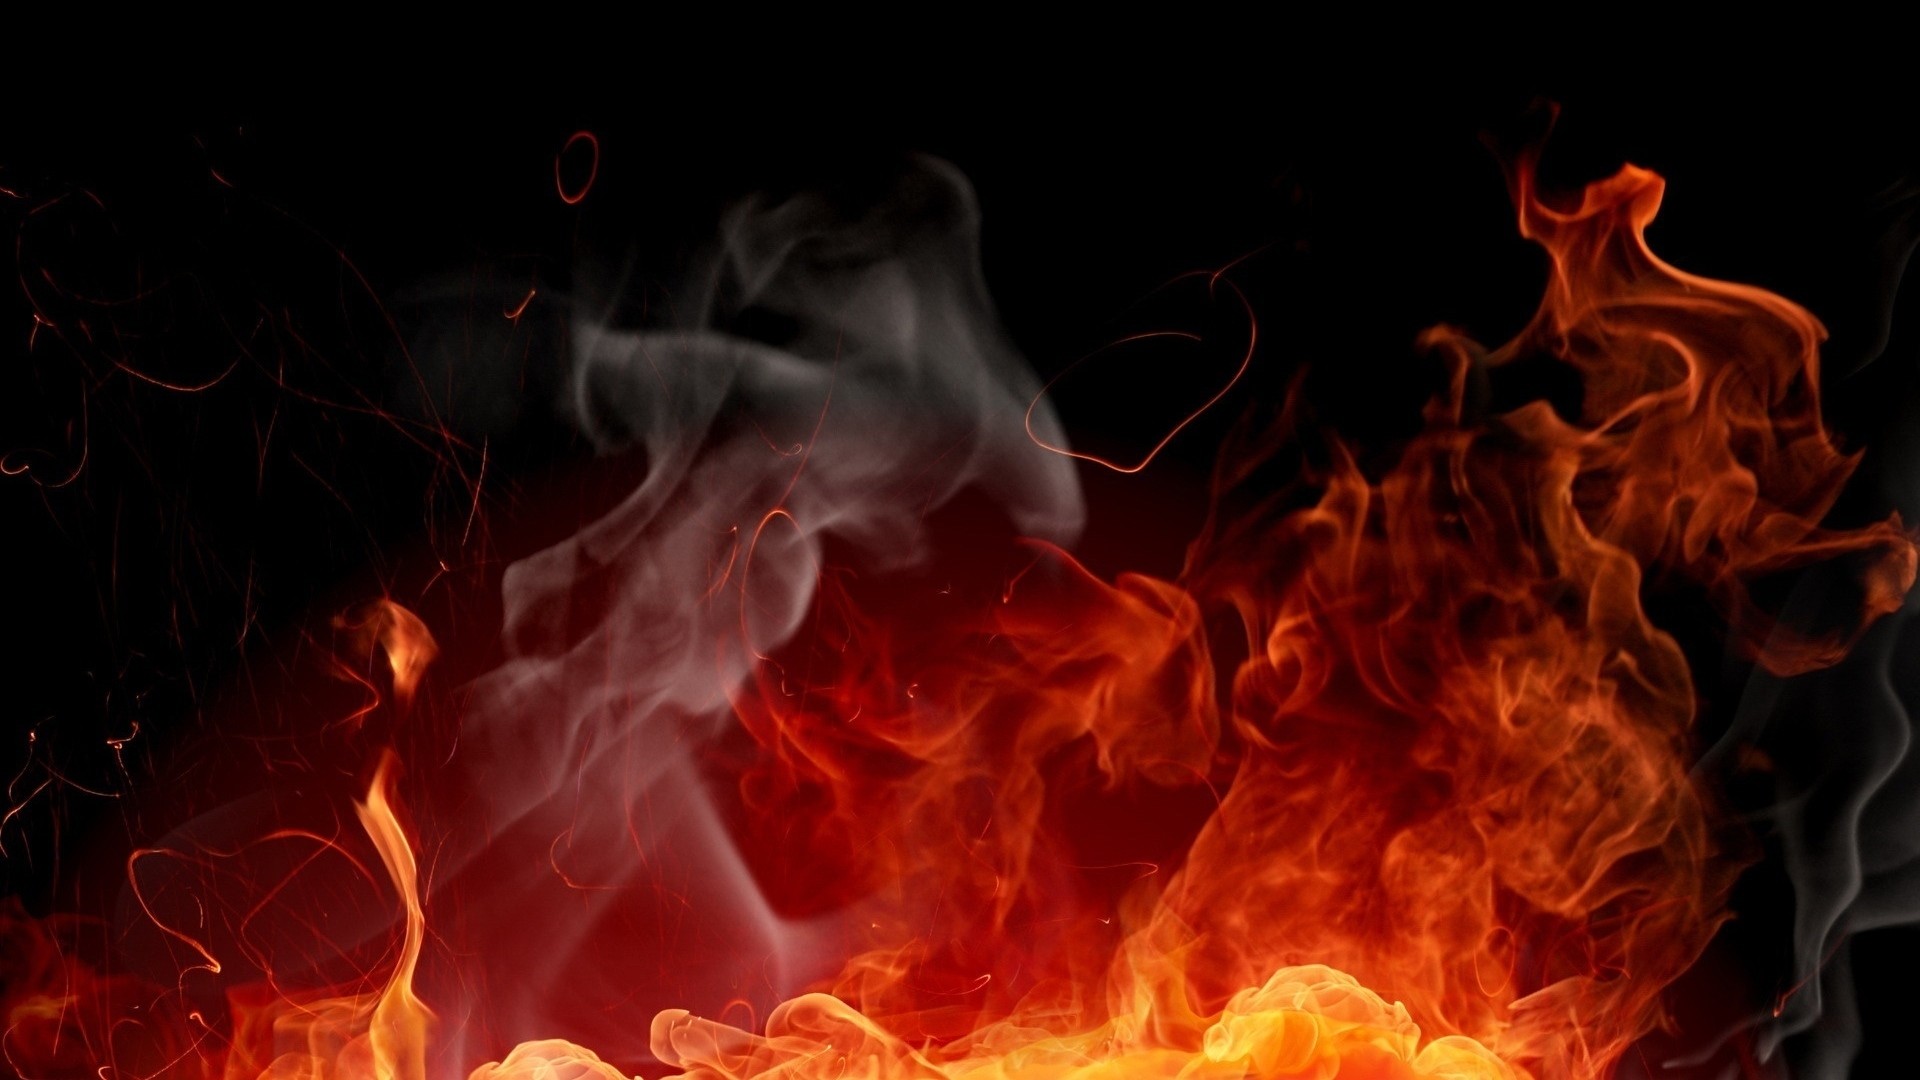 Black Fire Background with Sparks from Fire Stock Image  Image of  fireplace burn 163433713